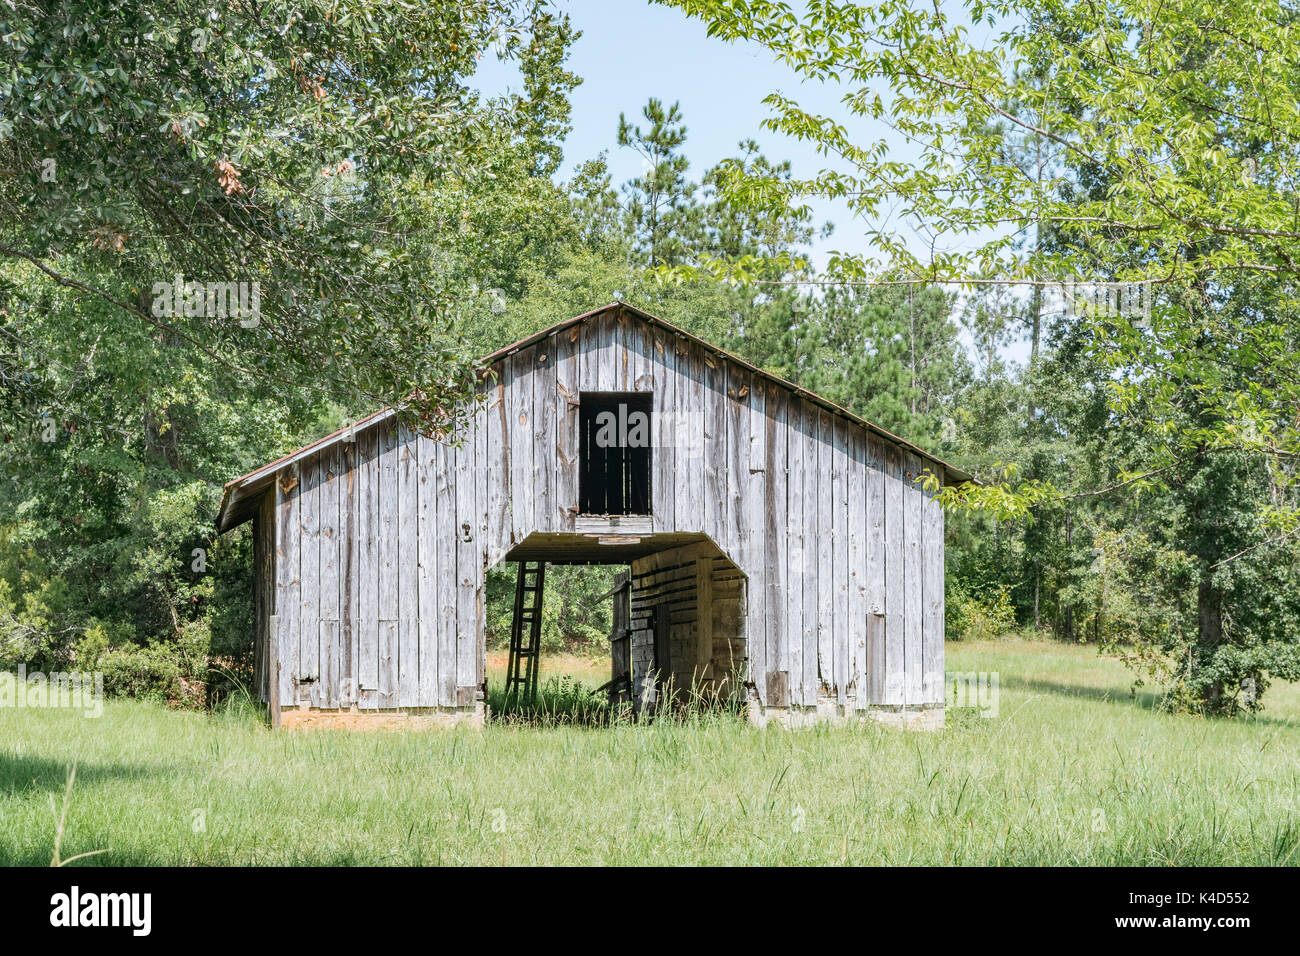 Old wooden barn on a farm in central Alabama, USA. Stock Photo